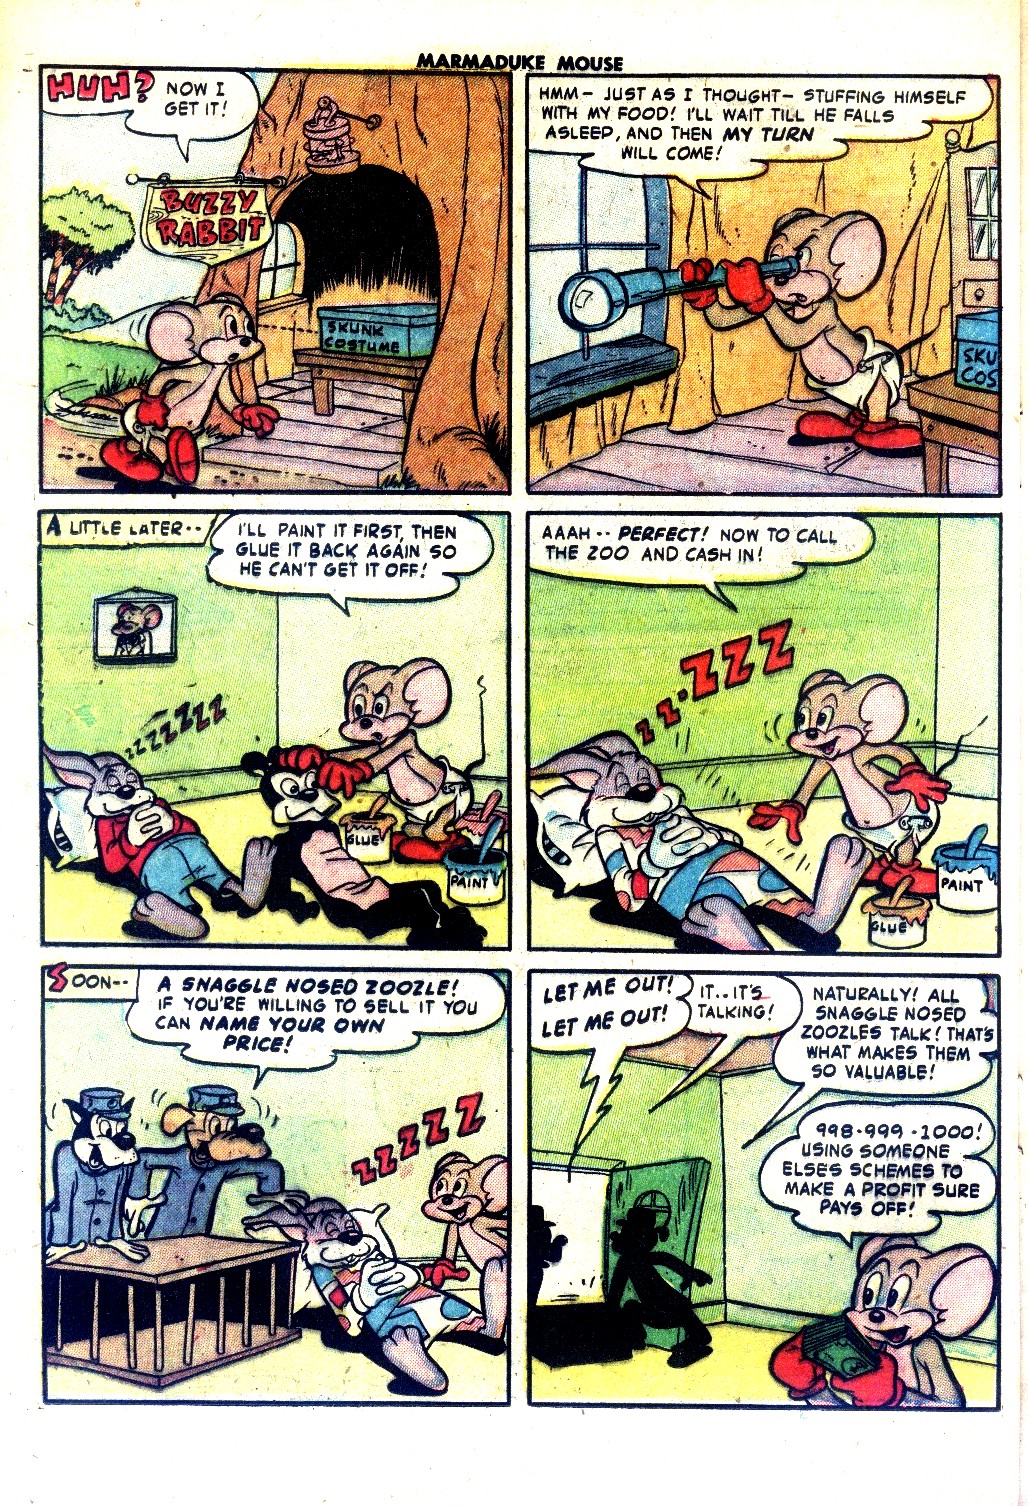 Read online Marmaduke Mouse comic -  Issue #40 - 24